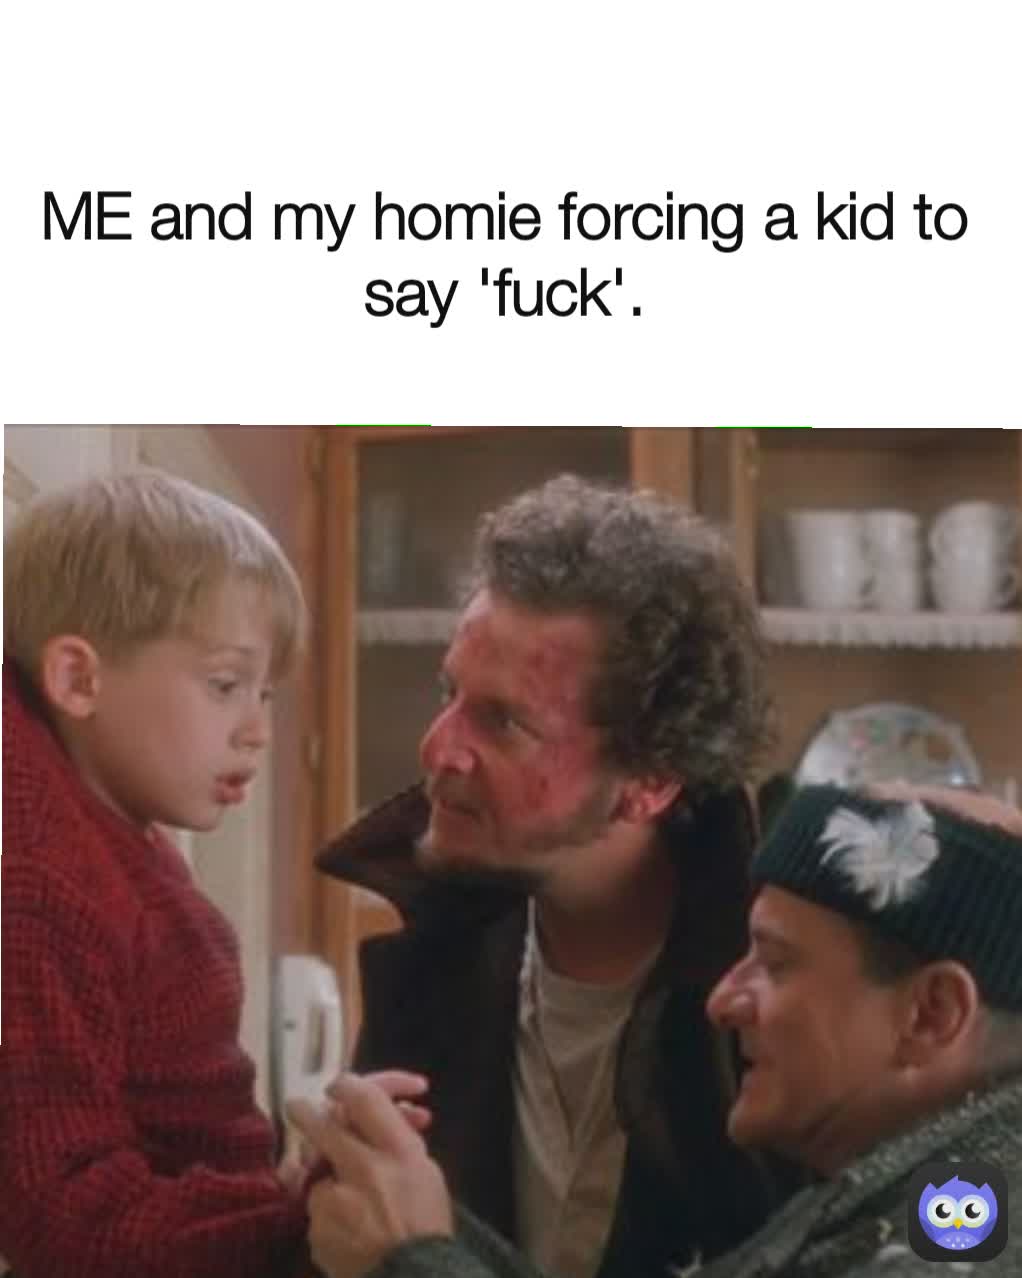 ME and my homie forcing a kid to say 'fuck'.